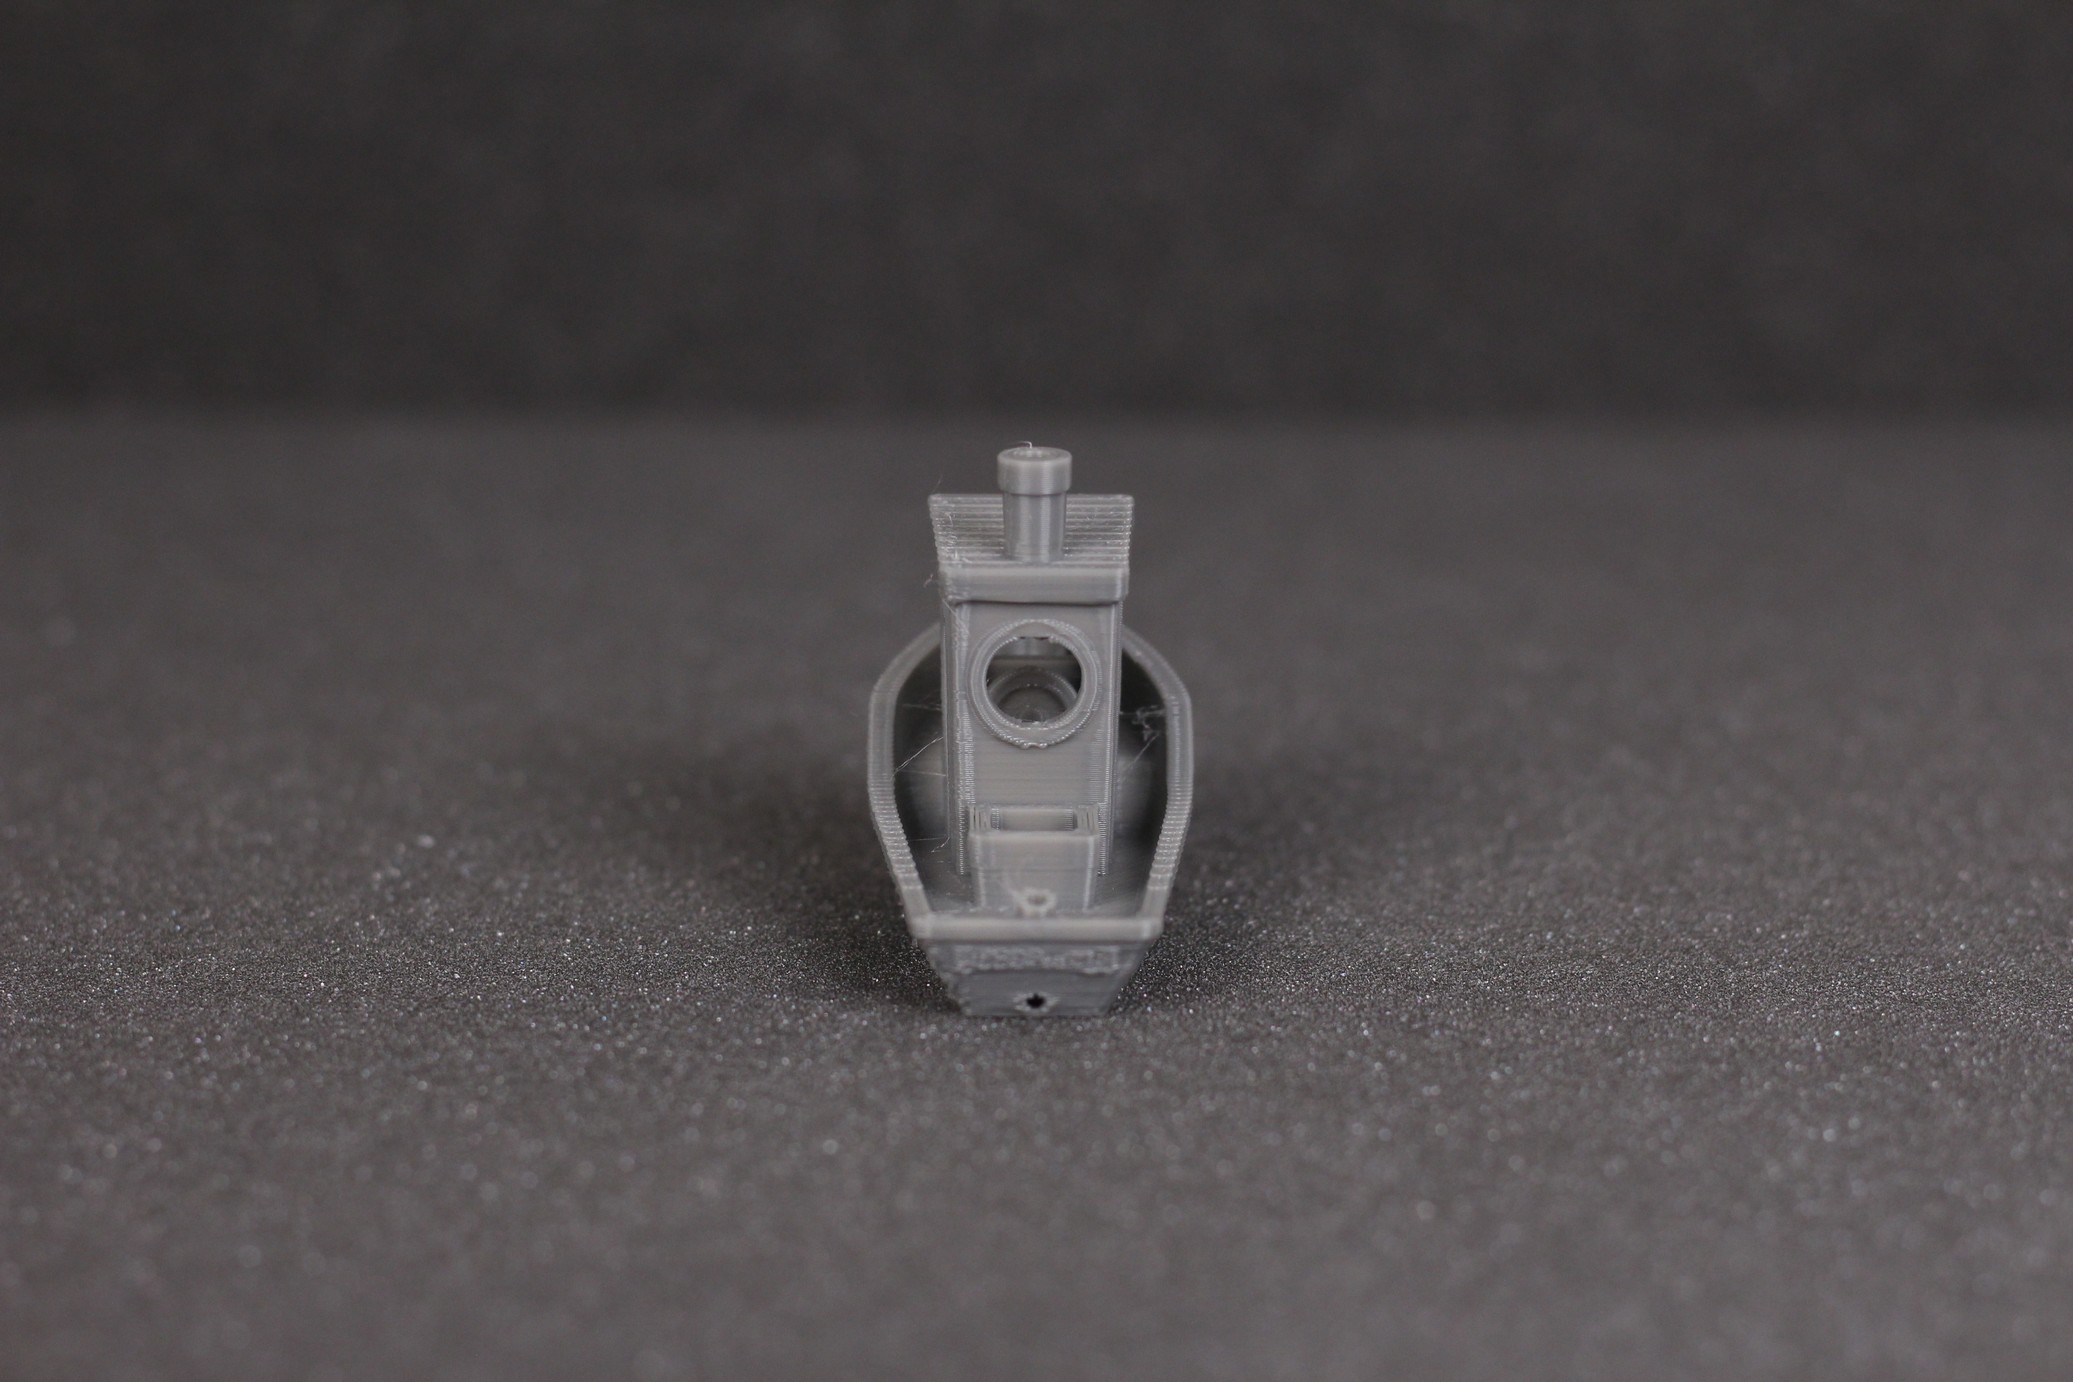 3D Benchy printed on the Ender 3 S1 4 | Creality Ender 3 S1 Review: Almost Perfect